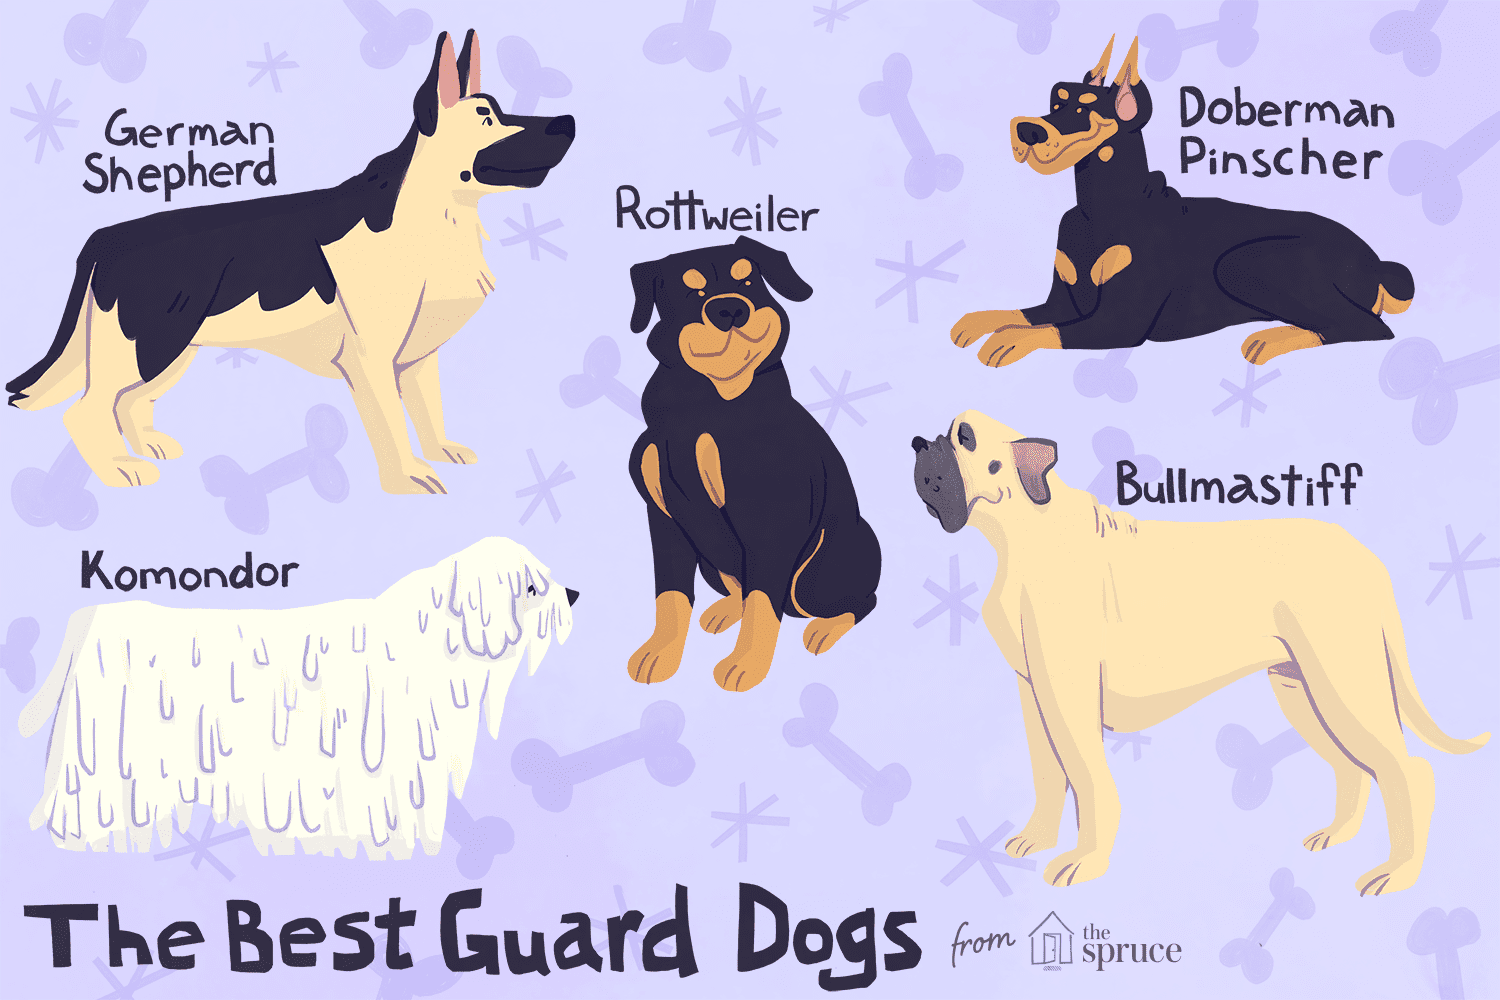 An illustration of the best guard dogs